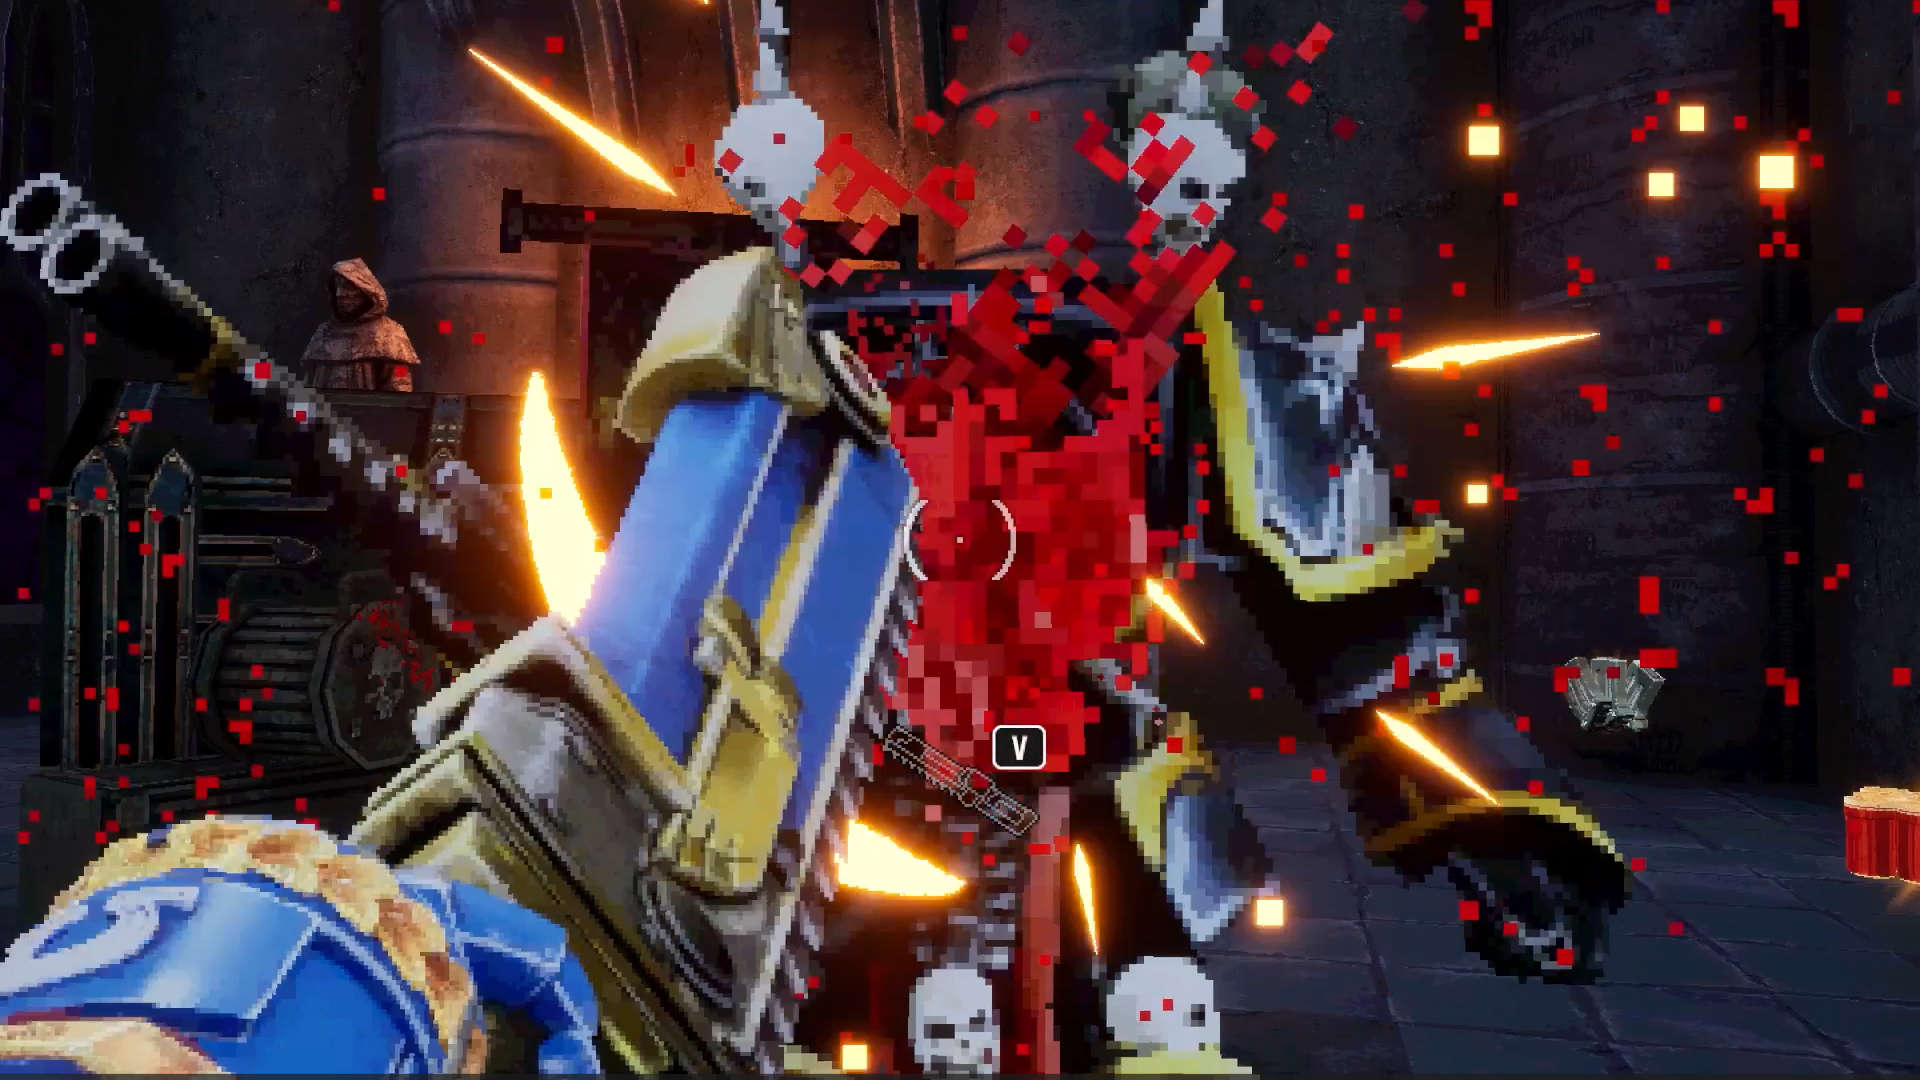 Warhammer 40k Boltgun is the 90s FPS you never ever knew you missed